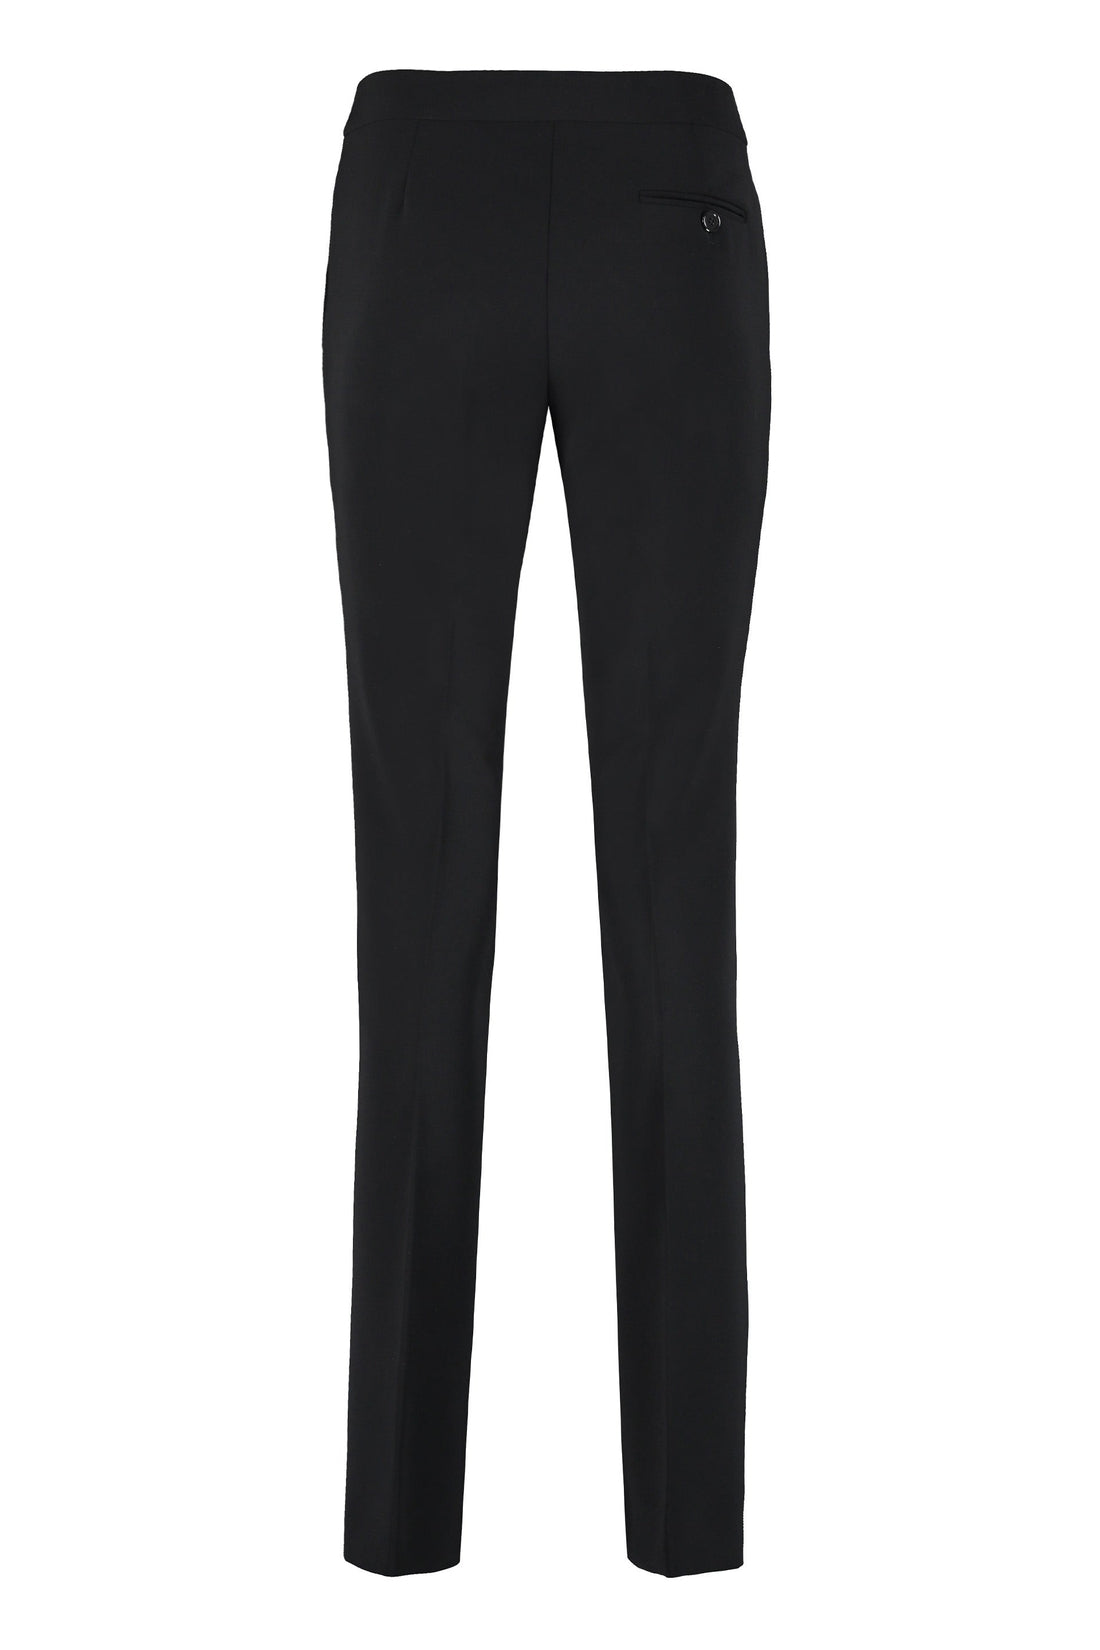 Moschino-OUTLET-SALE-Tailored trousers-ARCHIVIST